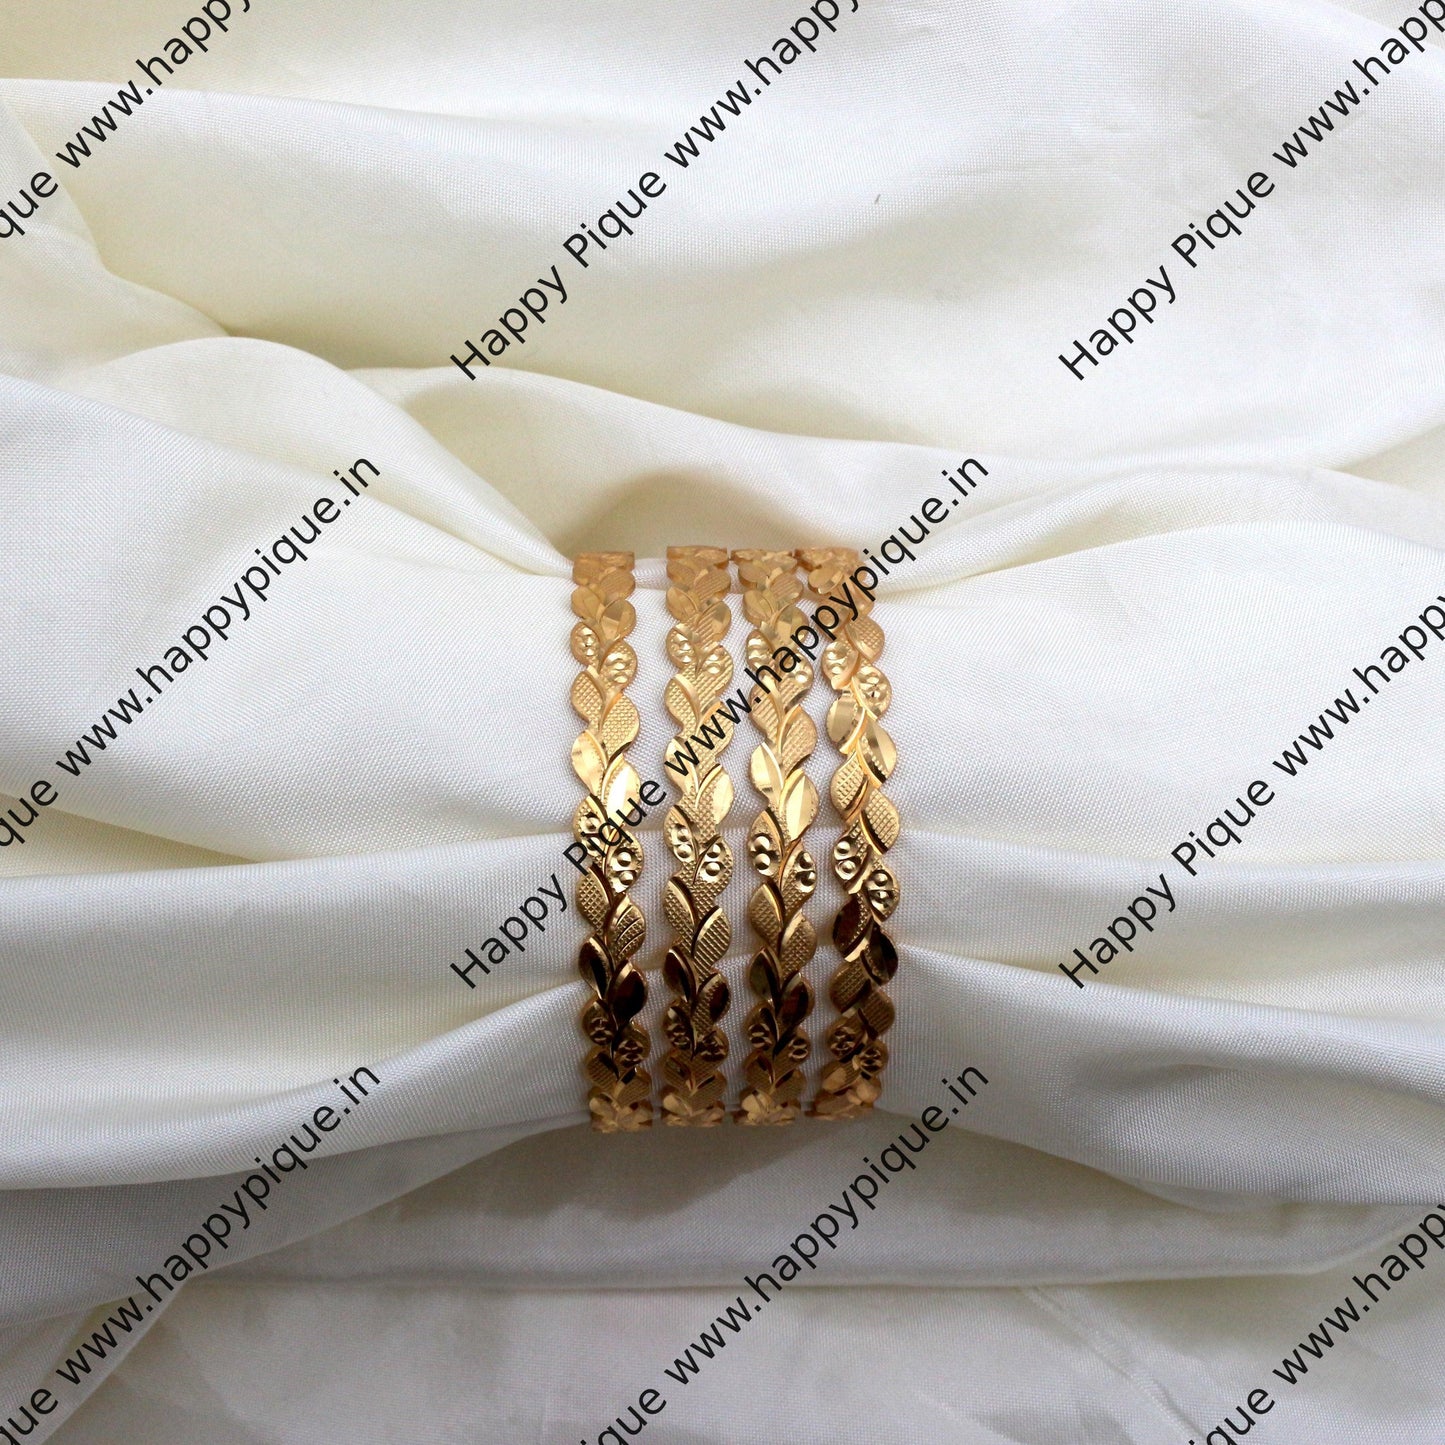 Real Gold Tone Set of 4 Traditional Leaf Bangles - SS020 - Daily Wear/Office Wear/Function Wear Bangles